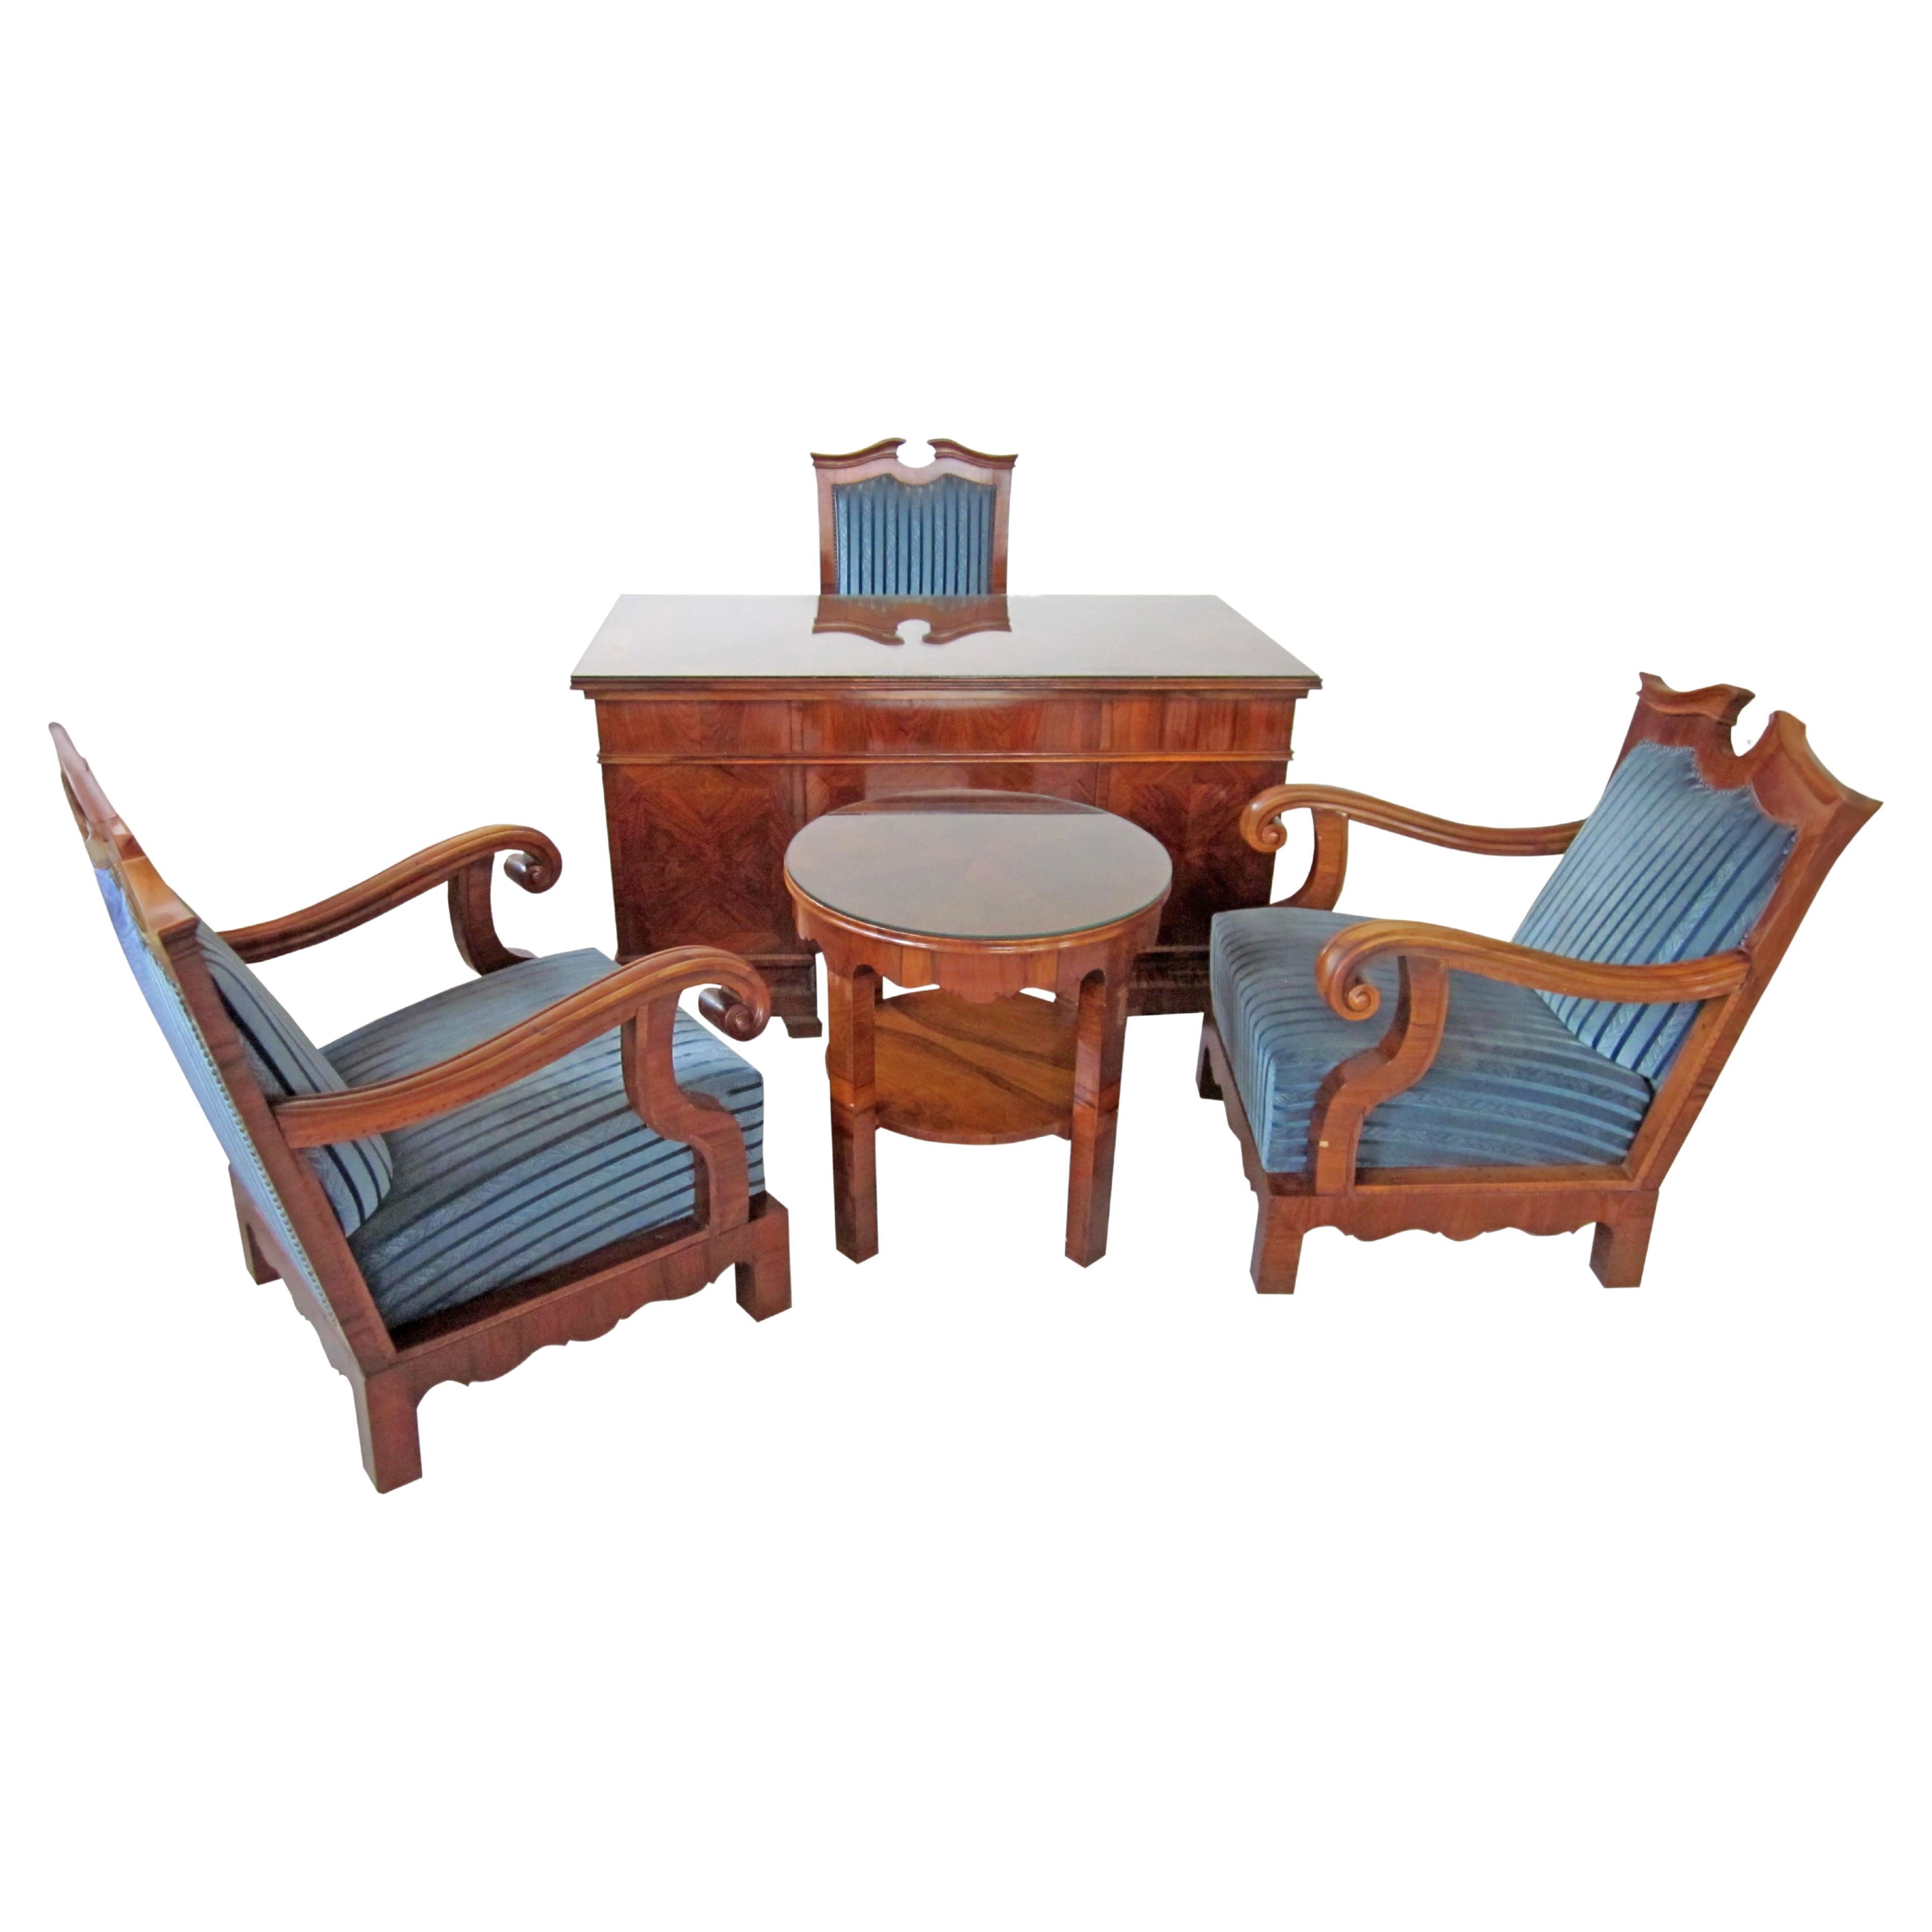 Late 19th Century Office Furniture Set - 1 Writing Desk, 1 Table, 3 Armchairs For Sale